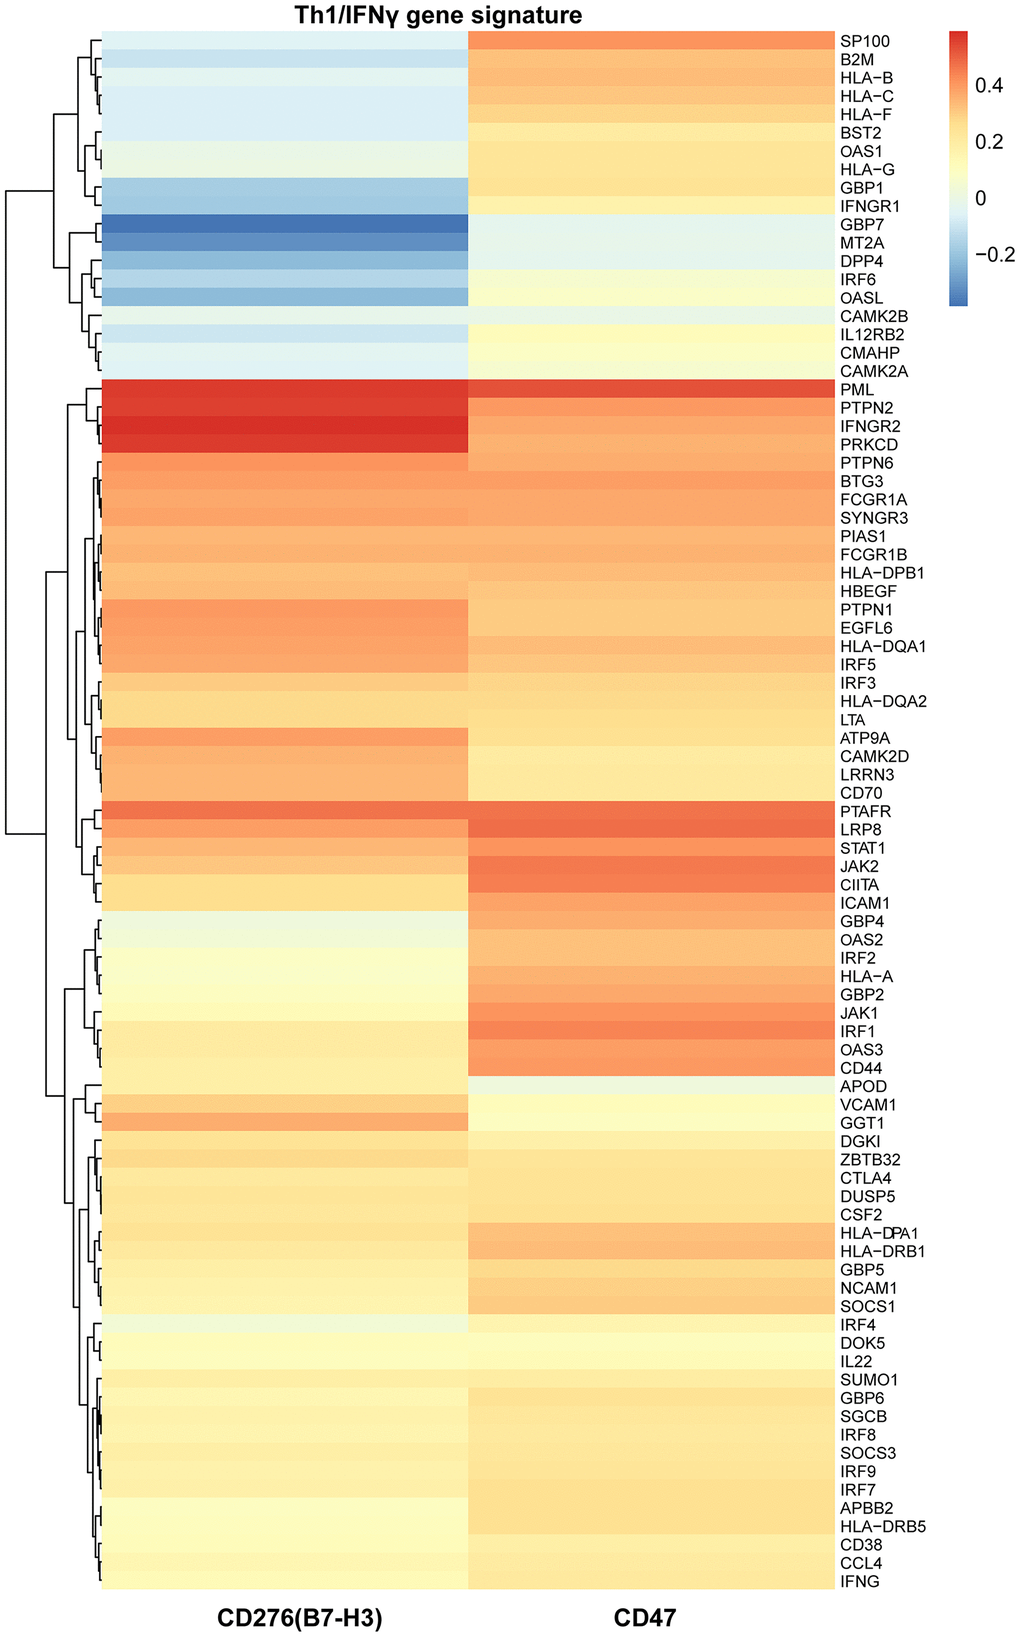 The relationships of B7-H3 and CD47 with Th1/IFNγ gene signature in TCGA-LIHC cohort. Heat map shows the correlations of each gene expression of Th1/IFNγ gene signature with B7-H3 and CD47 expression, which were computed based on 345 HCC cases. Red color indicates positive Pearson correlation coefficients; blue color indicates negative correlations.